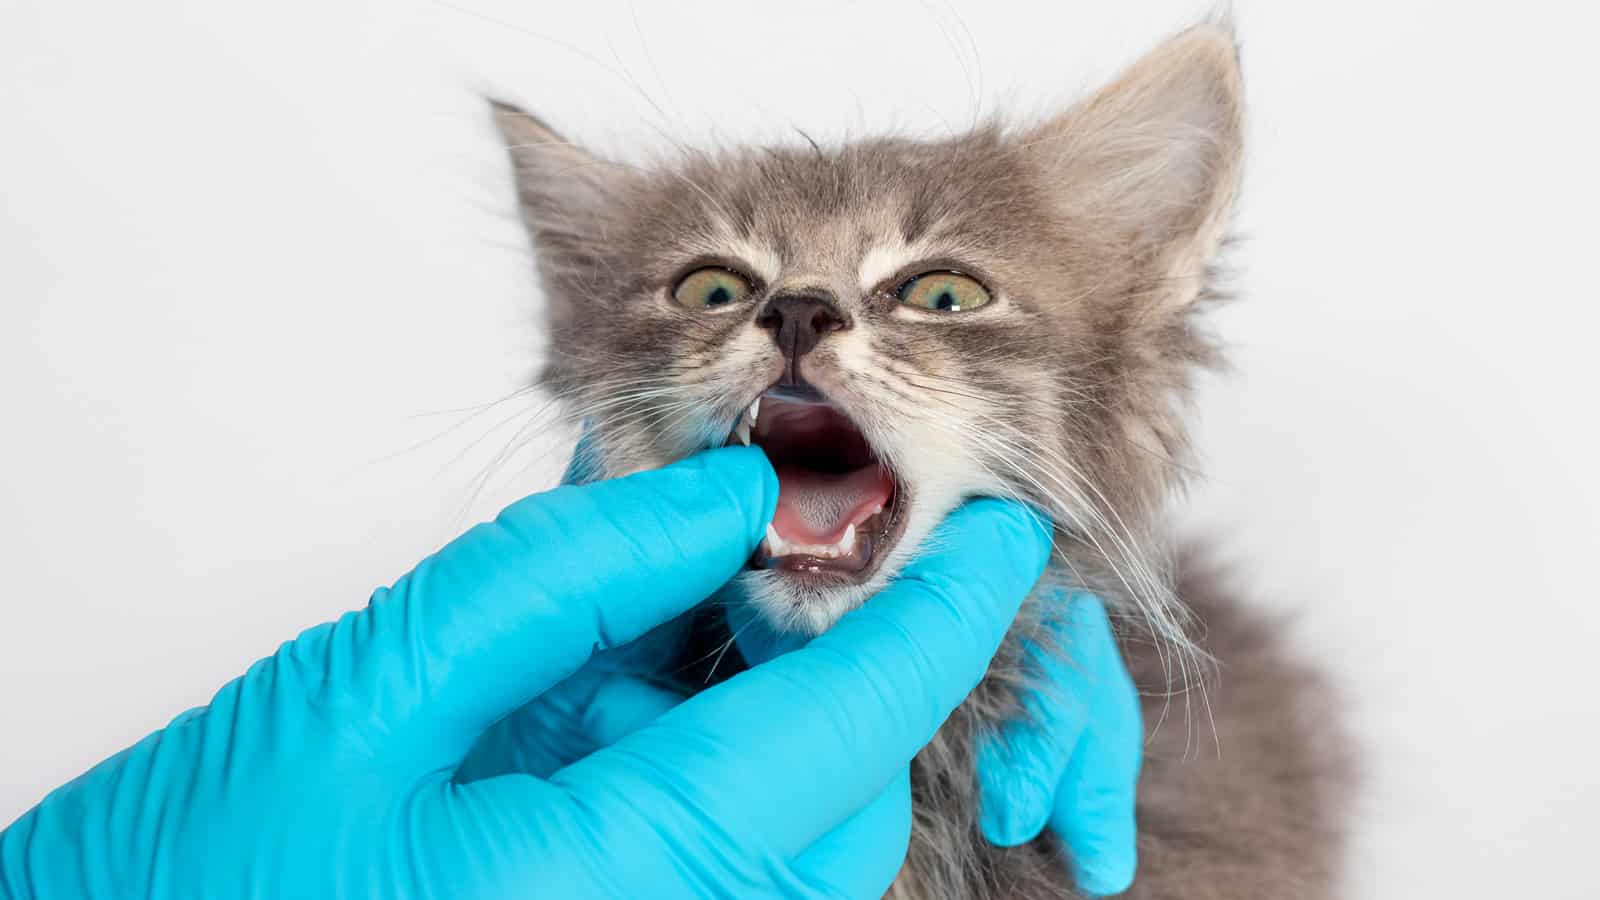 Examination of milk teeth tongue in a 1 or 2 month old kitten. Dentistry for cats, place for text.